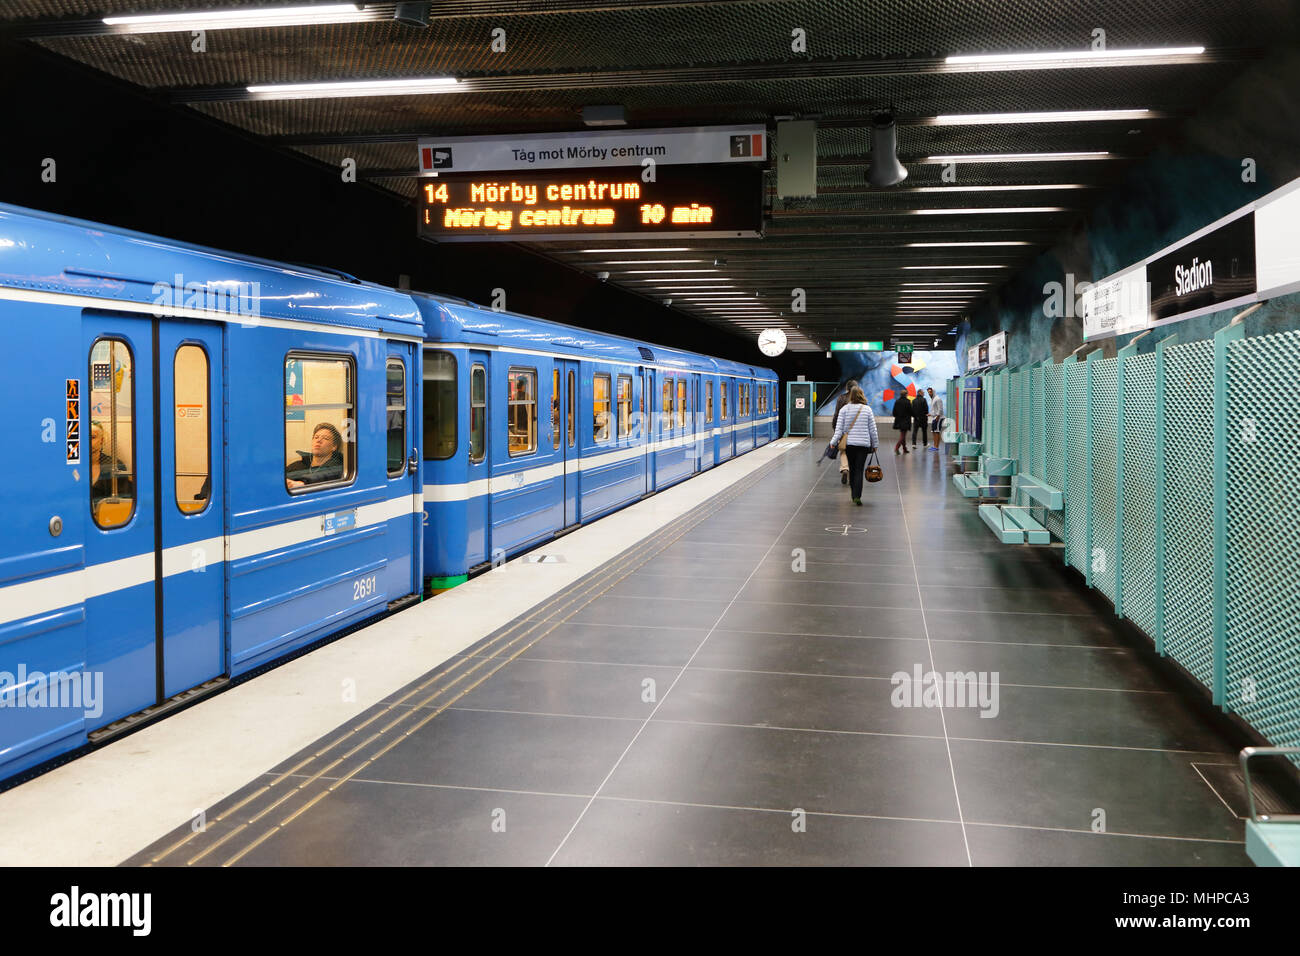 Stockholm, Sweden April 23, 2014: A blue metro train with closed doors on line 14 towards Morby center is ready for departure fromthe undrground stati Stock Photo